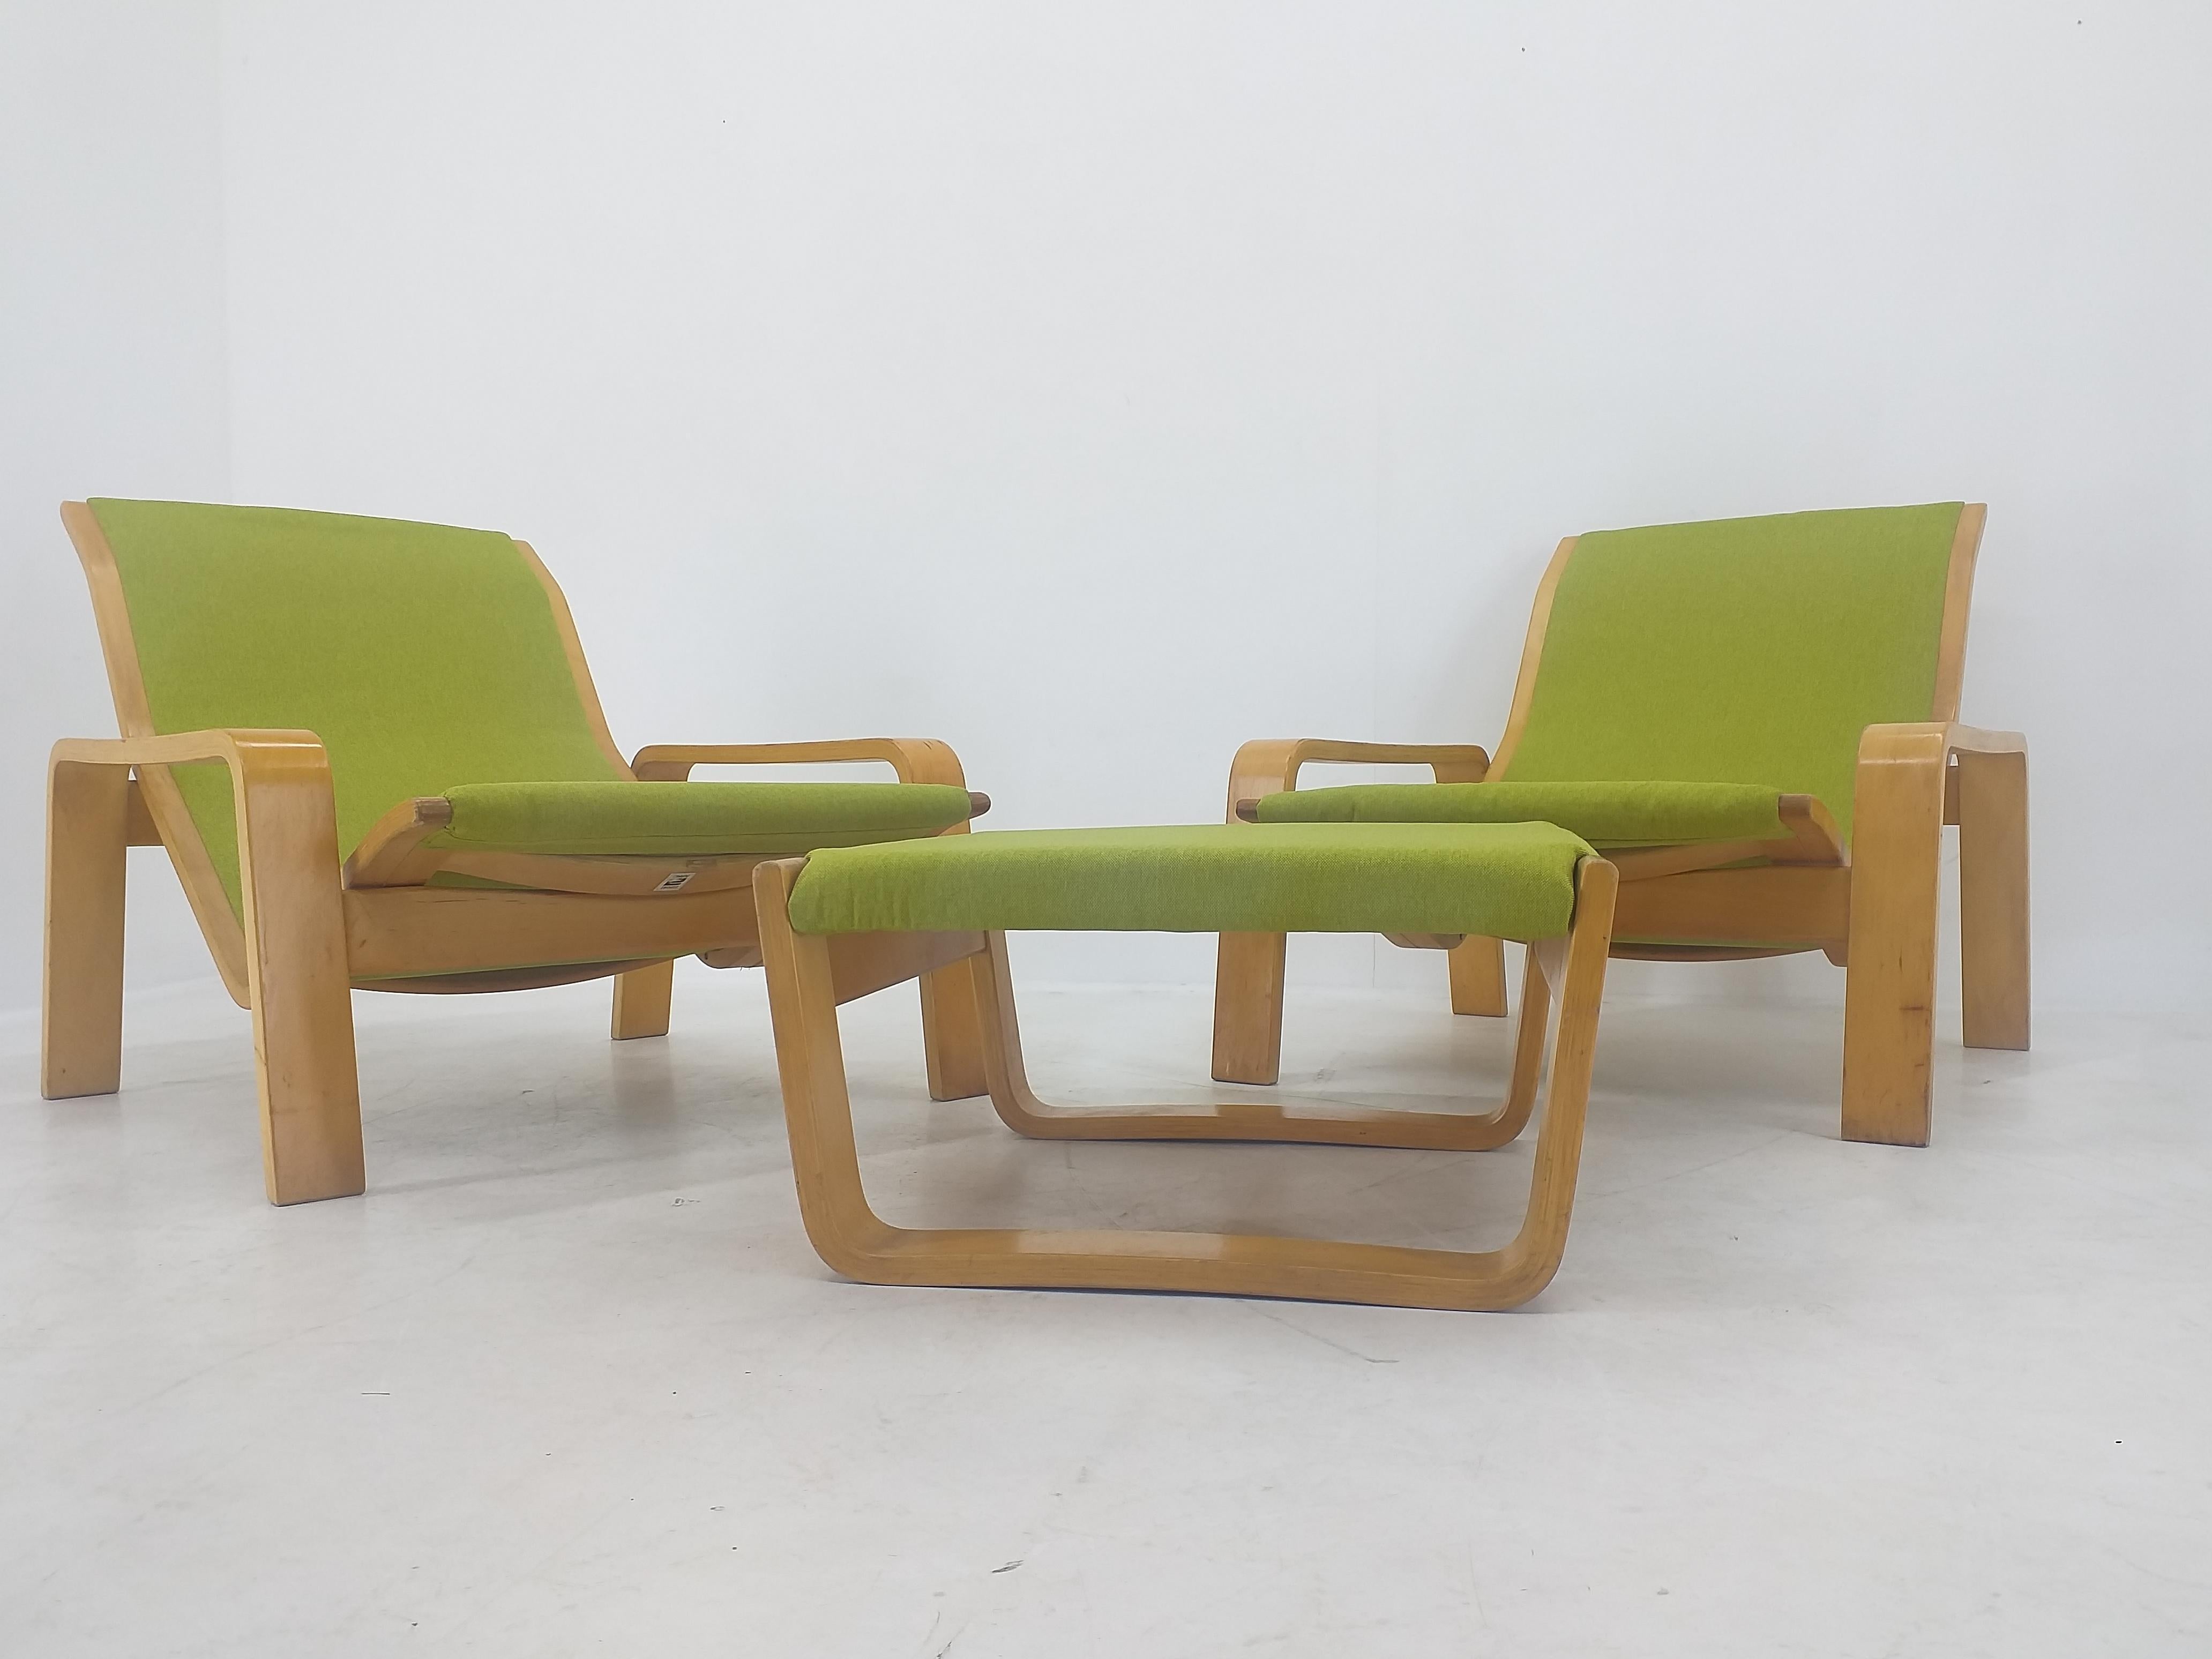 Pair of Lounge Chairs Pulkka, Ilmari Lappalainen for ASKO, Finland, 1970s For Sale 2